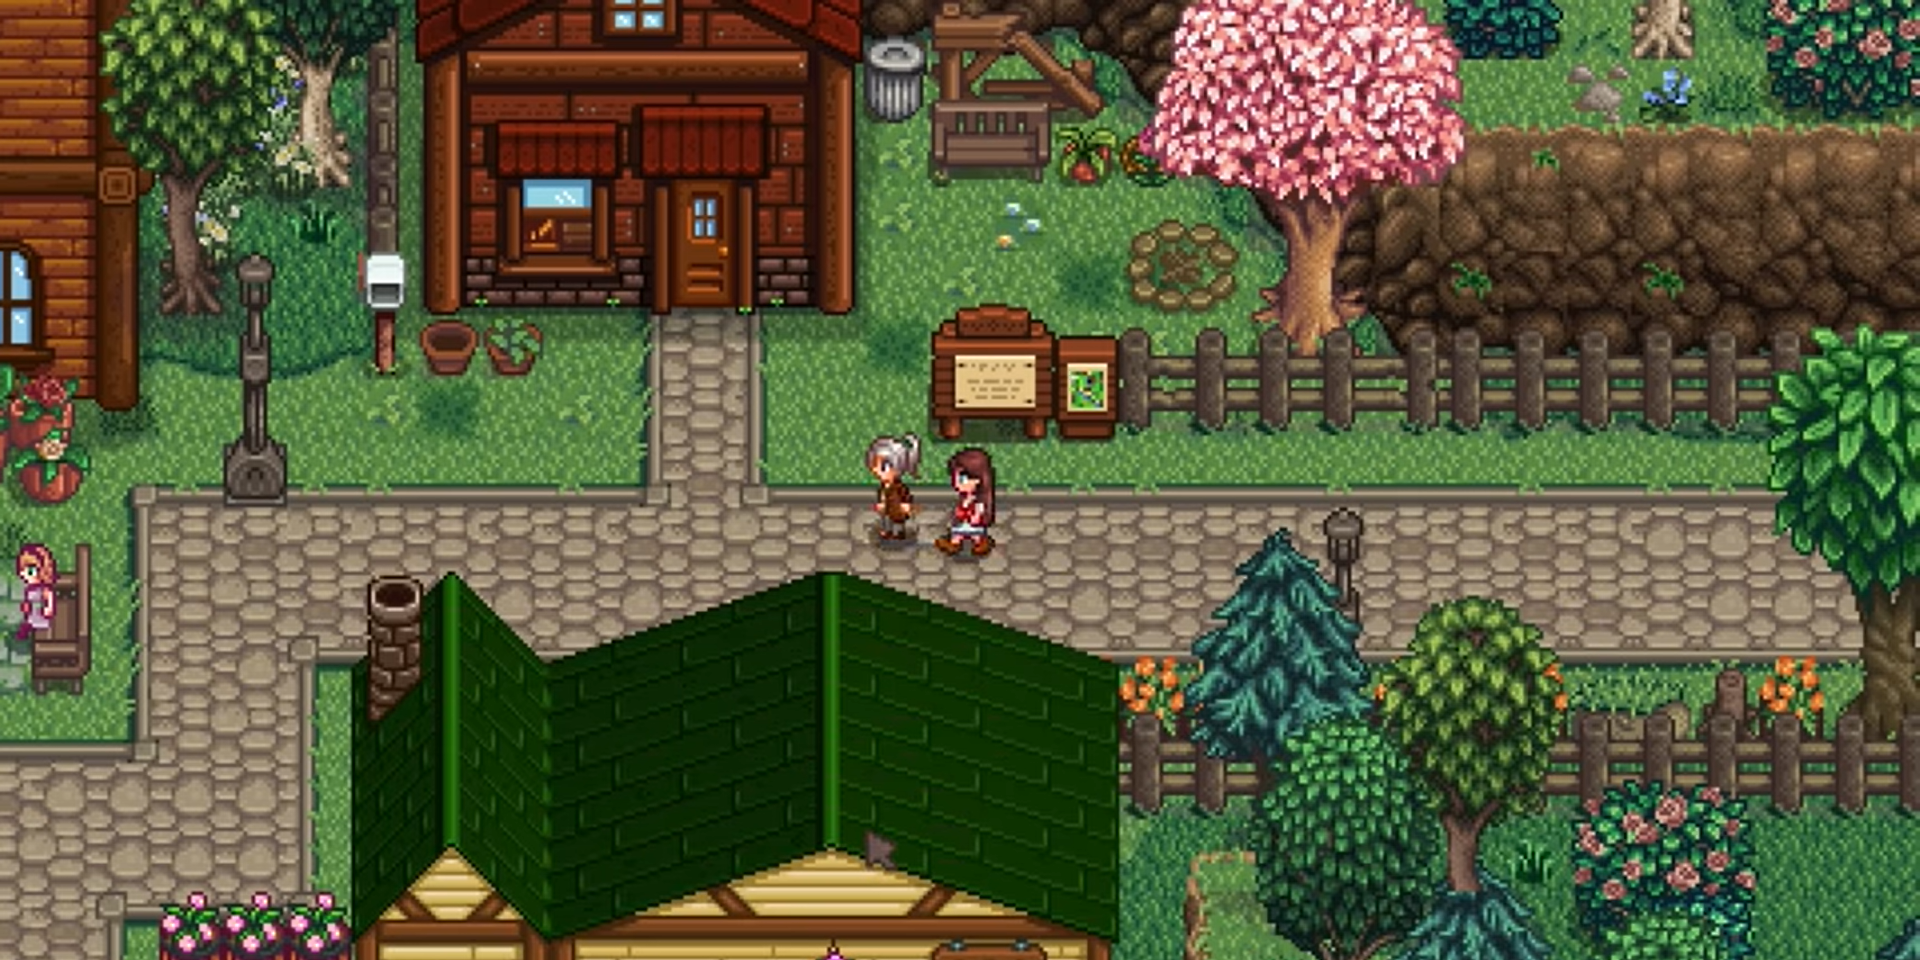 Lenny takes a new farmer on a tour of Ridgeside Village. Above them, a broken down special requests board is hidden behind a bench.